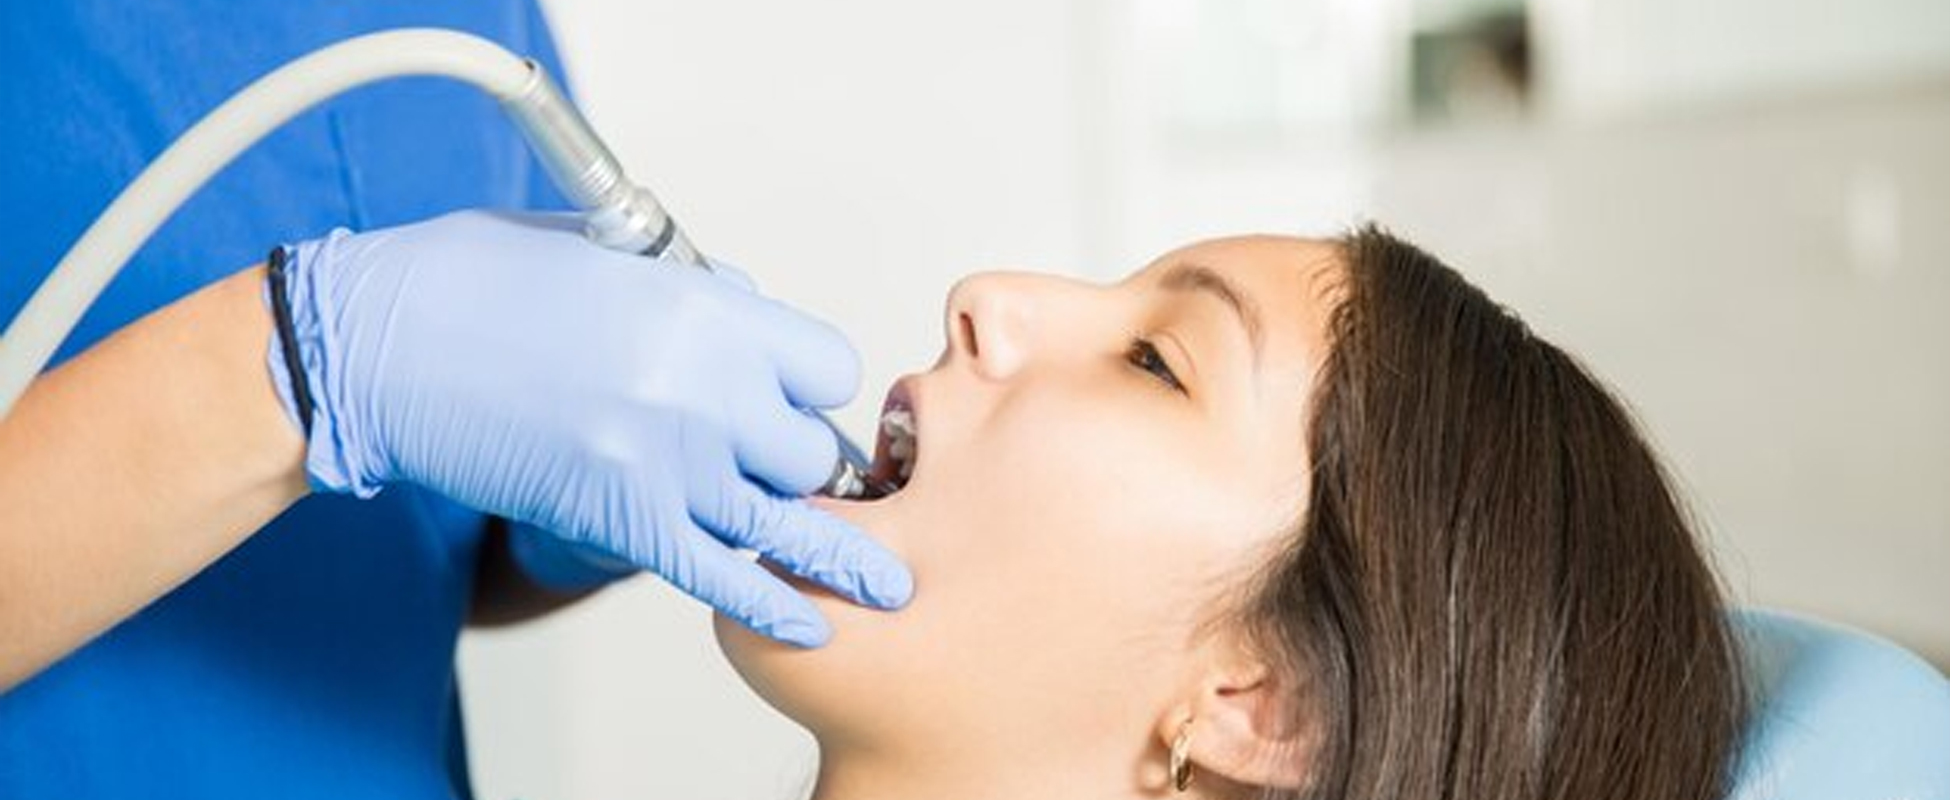 WHAT IS A DENTAL FILLING?